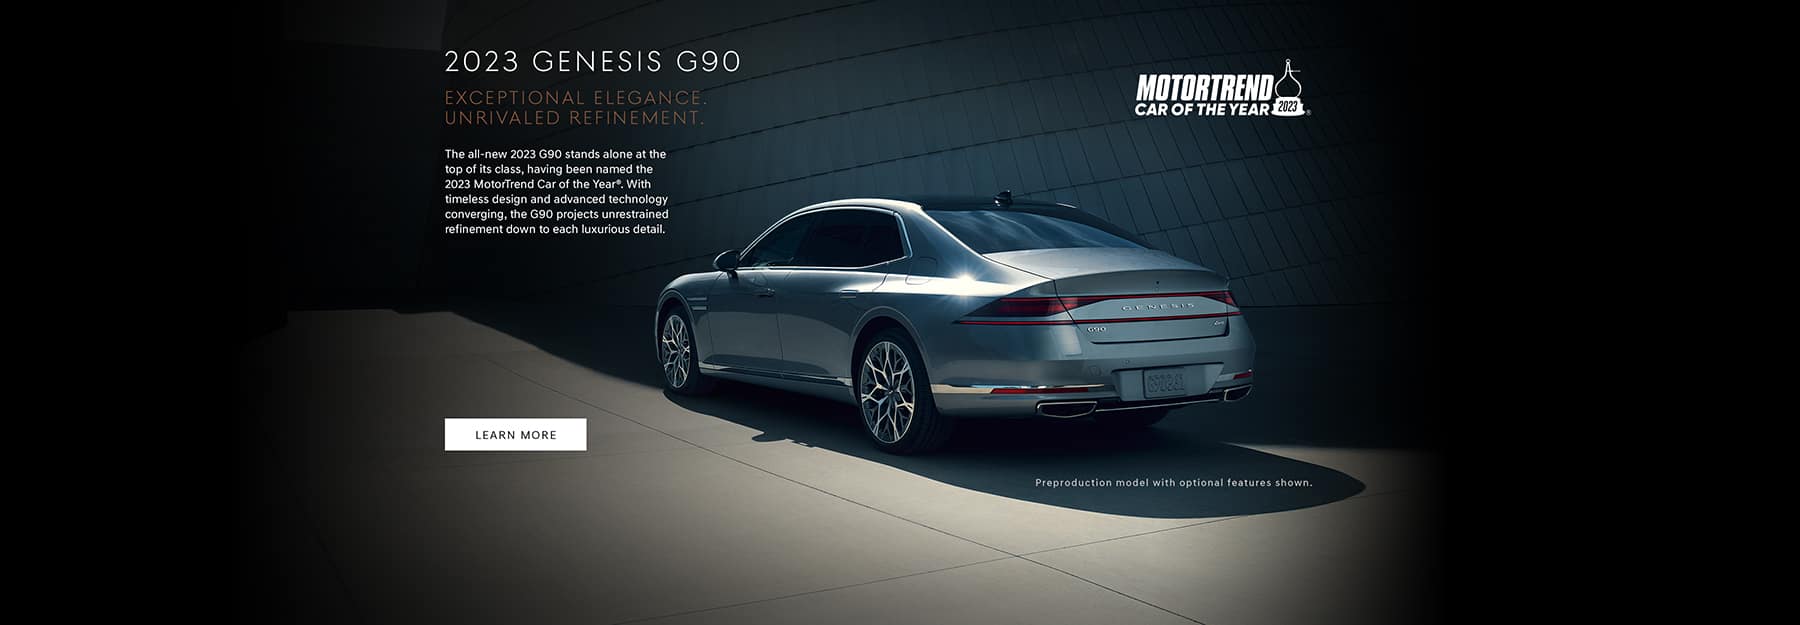 G90 Car of the year